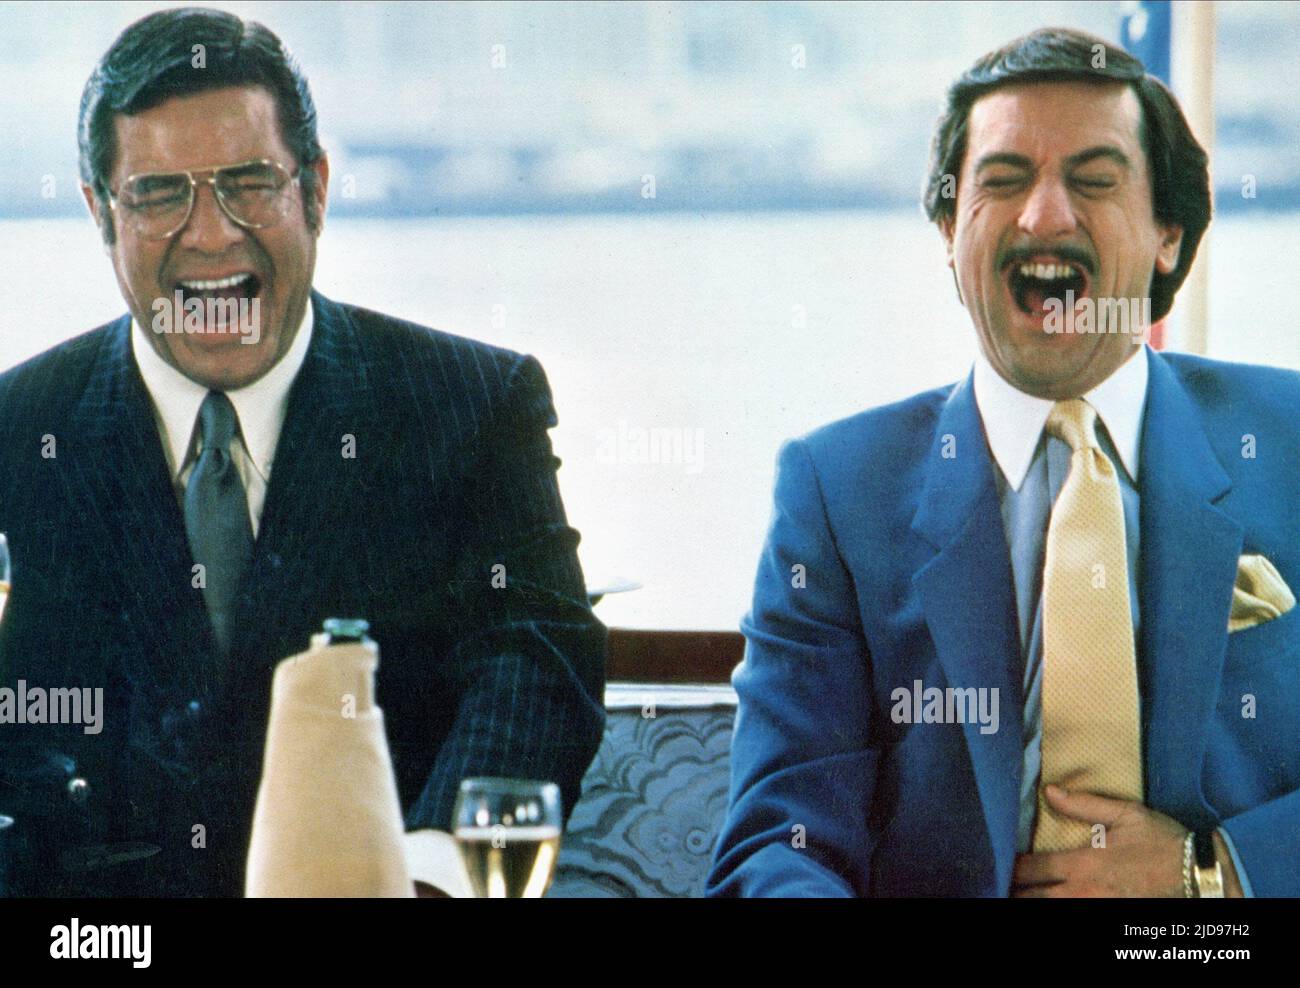 LEWIS,NIRO, THE KING OF COMEDY, 1982, Stock Photo